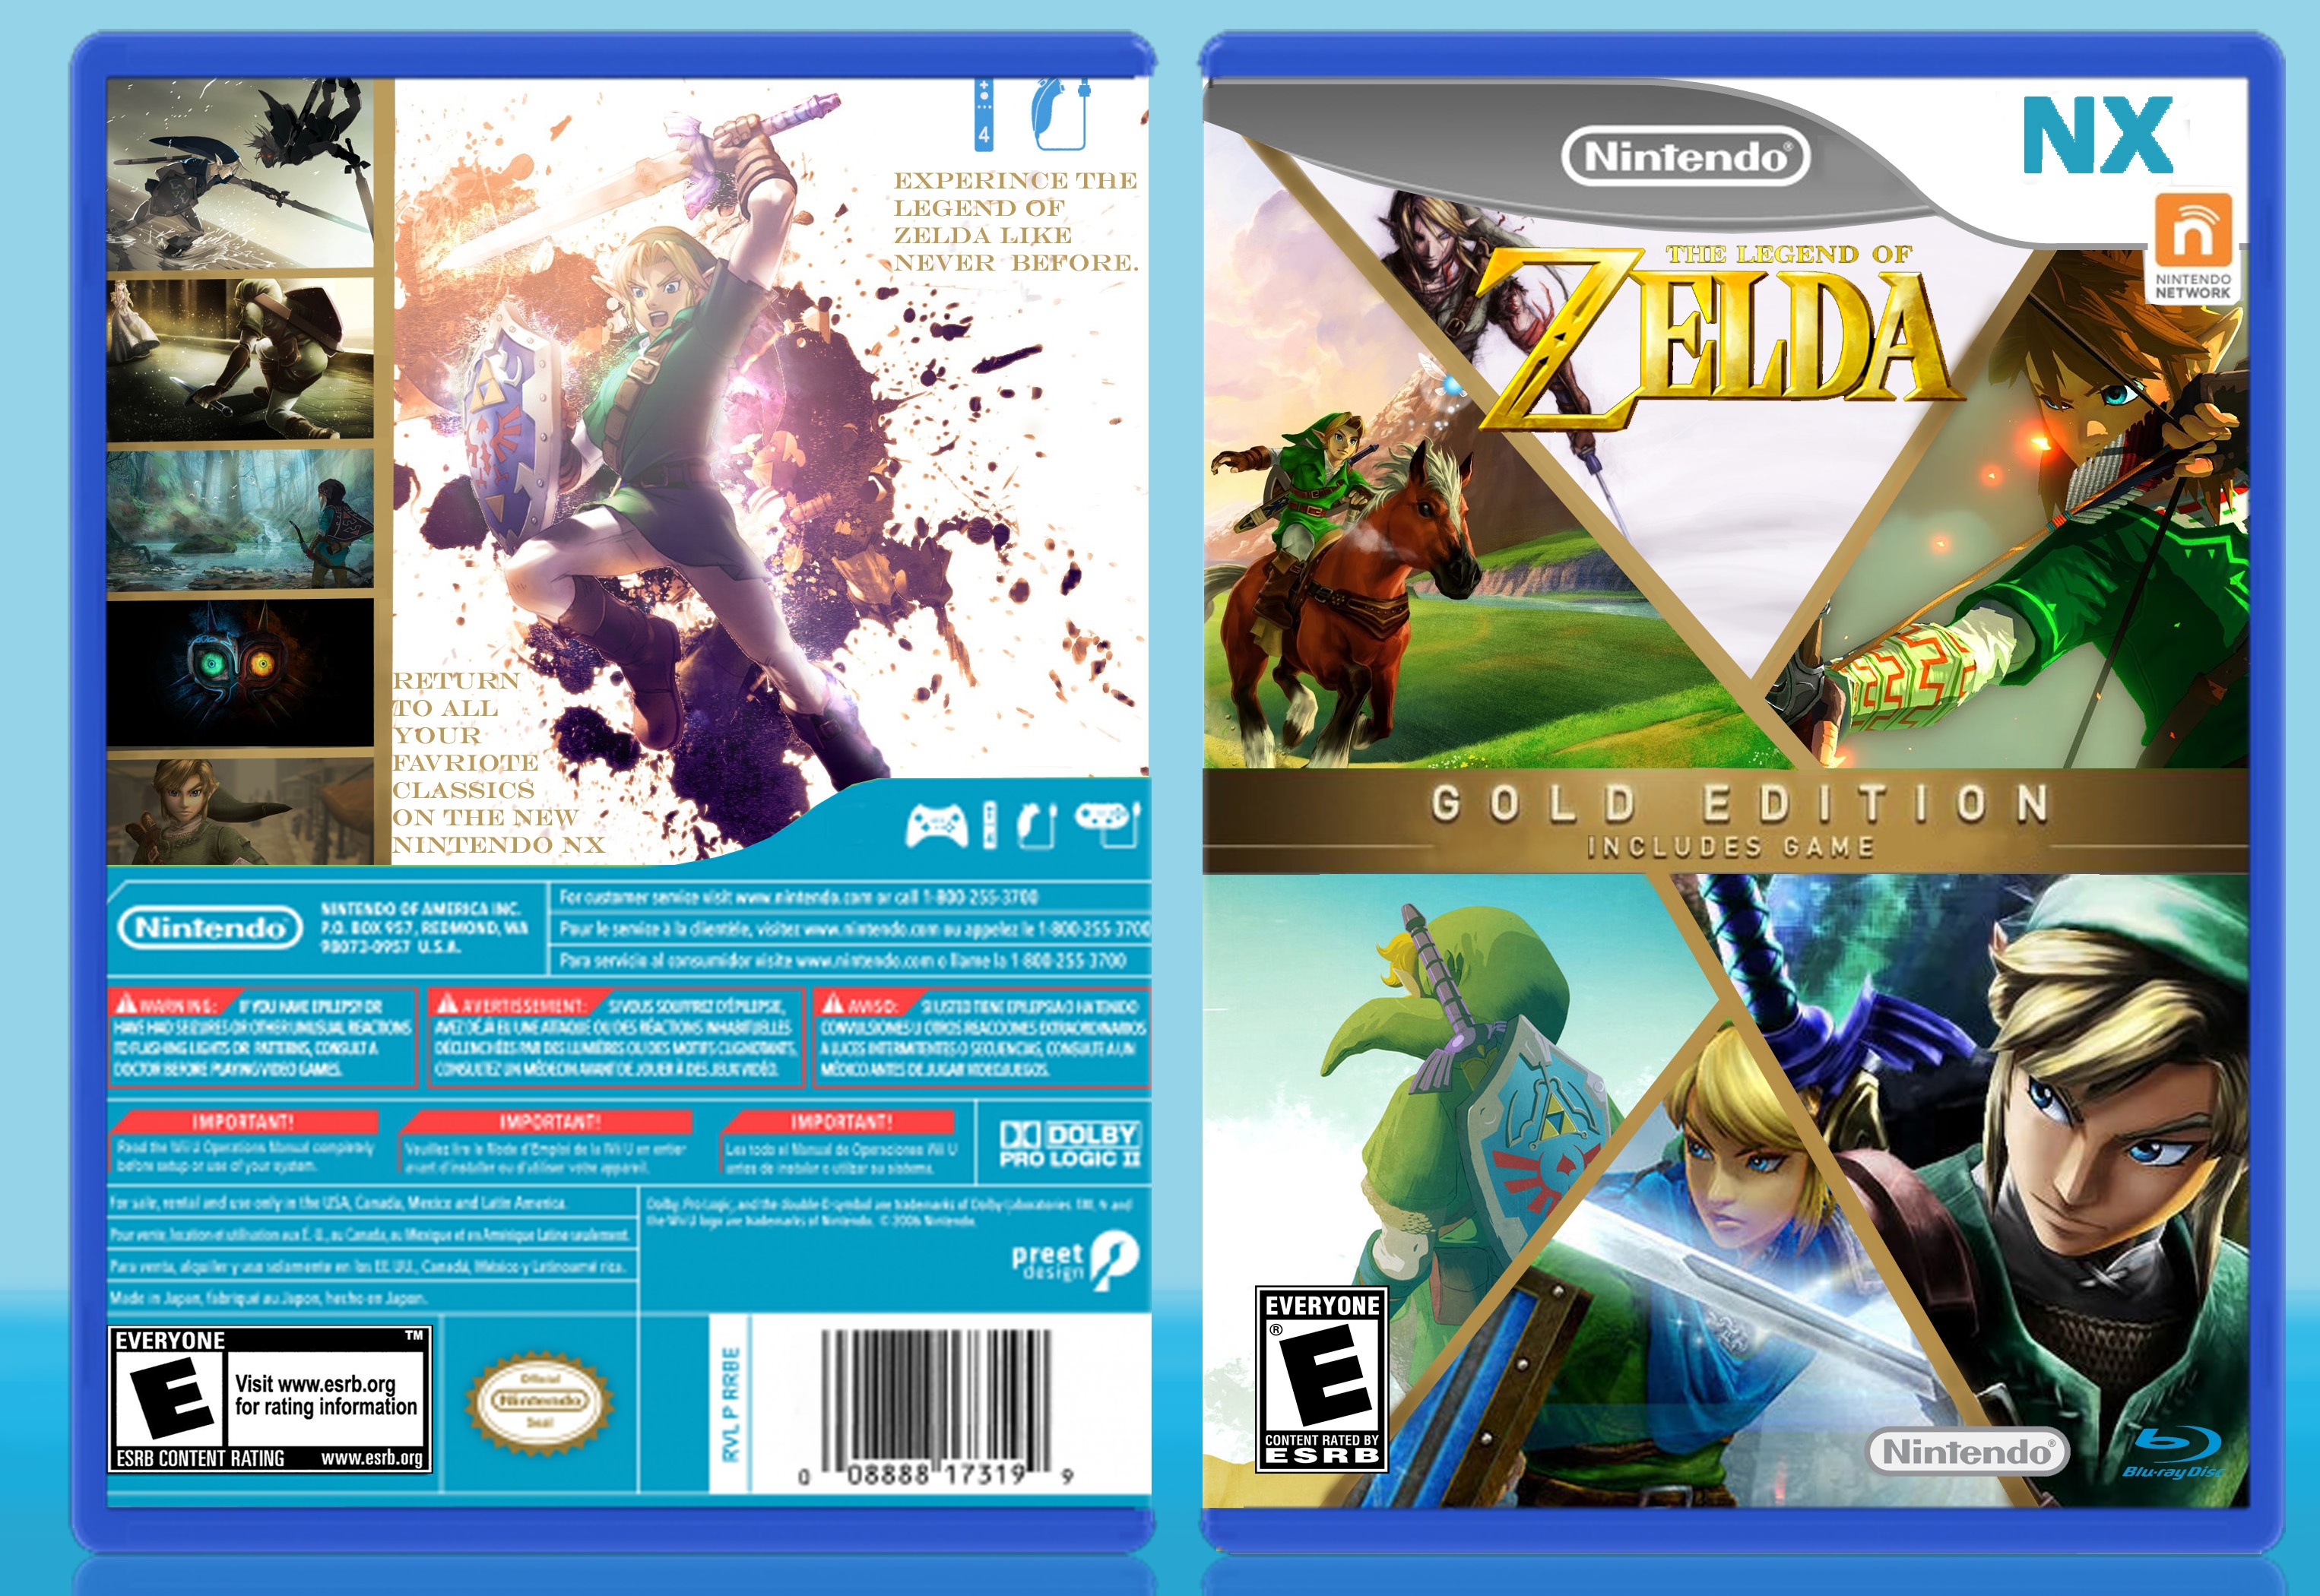 The legend of zelda NX collection box cover